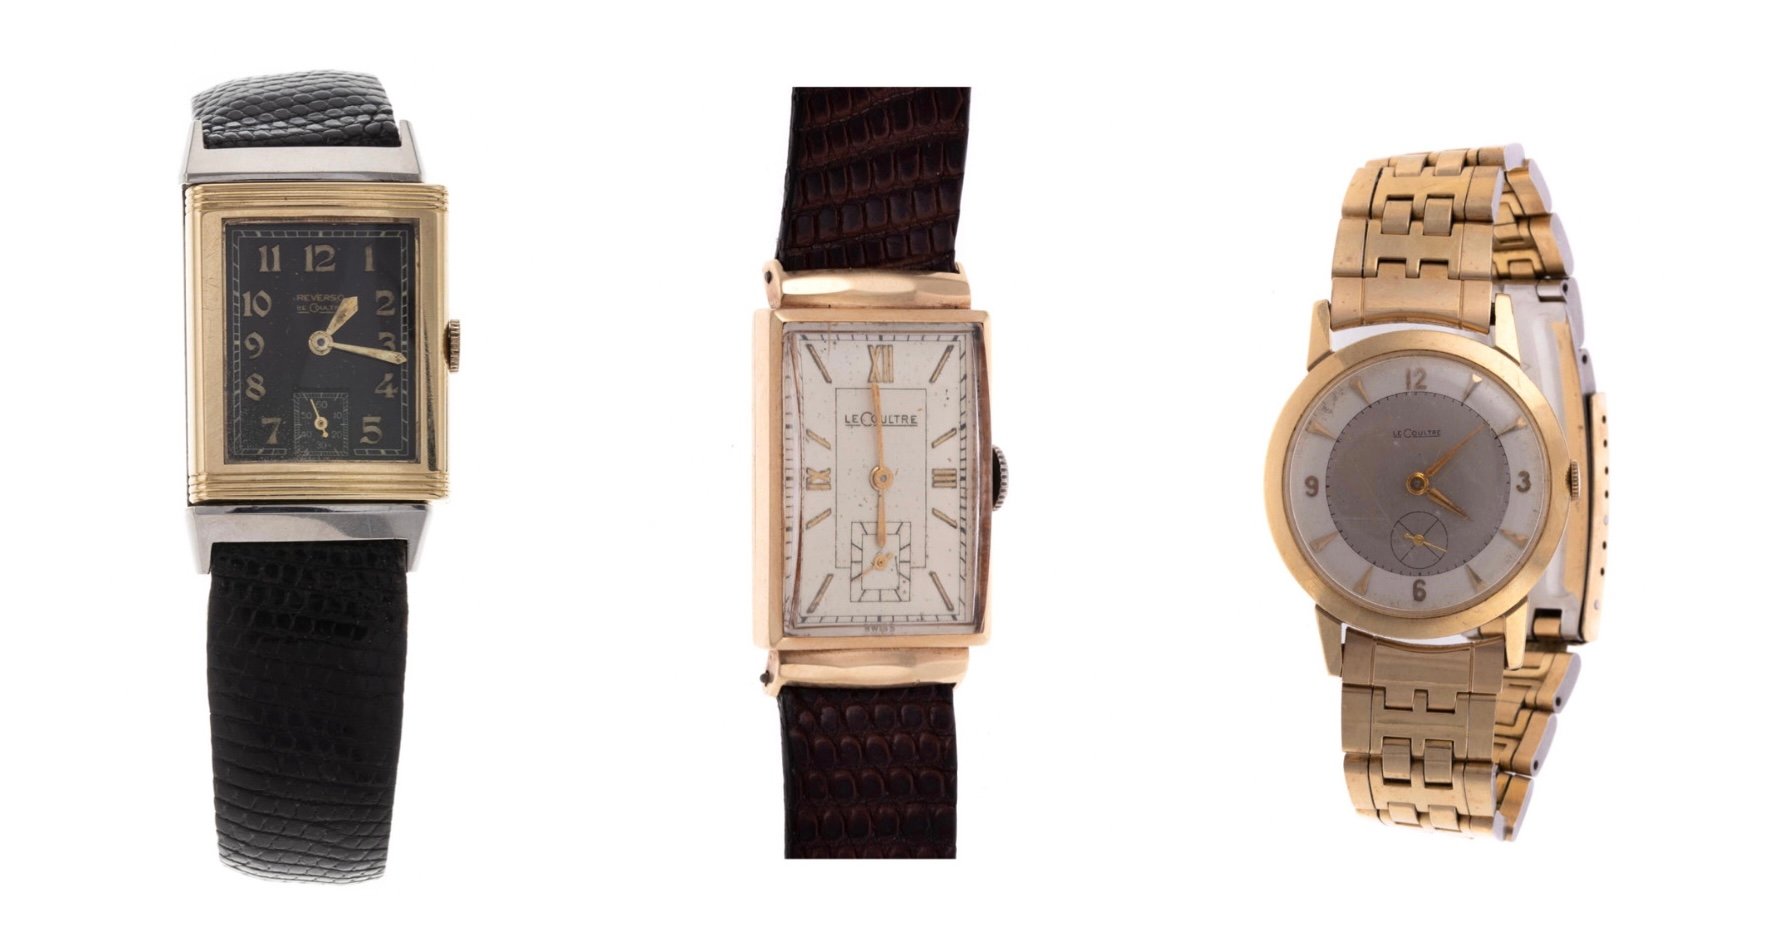 Jaeger-LeCoultre watches